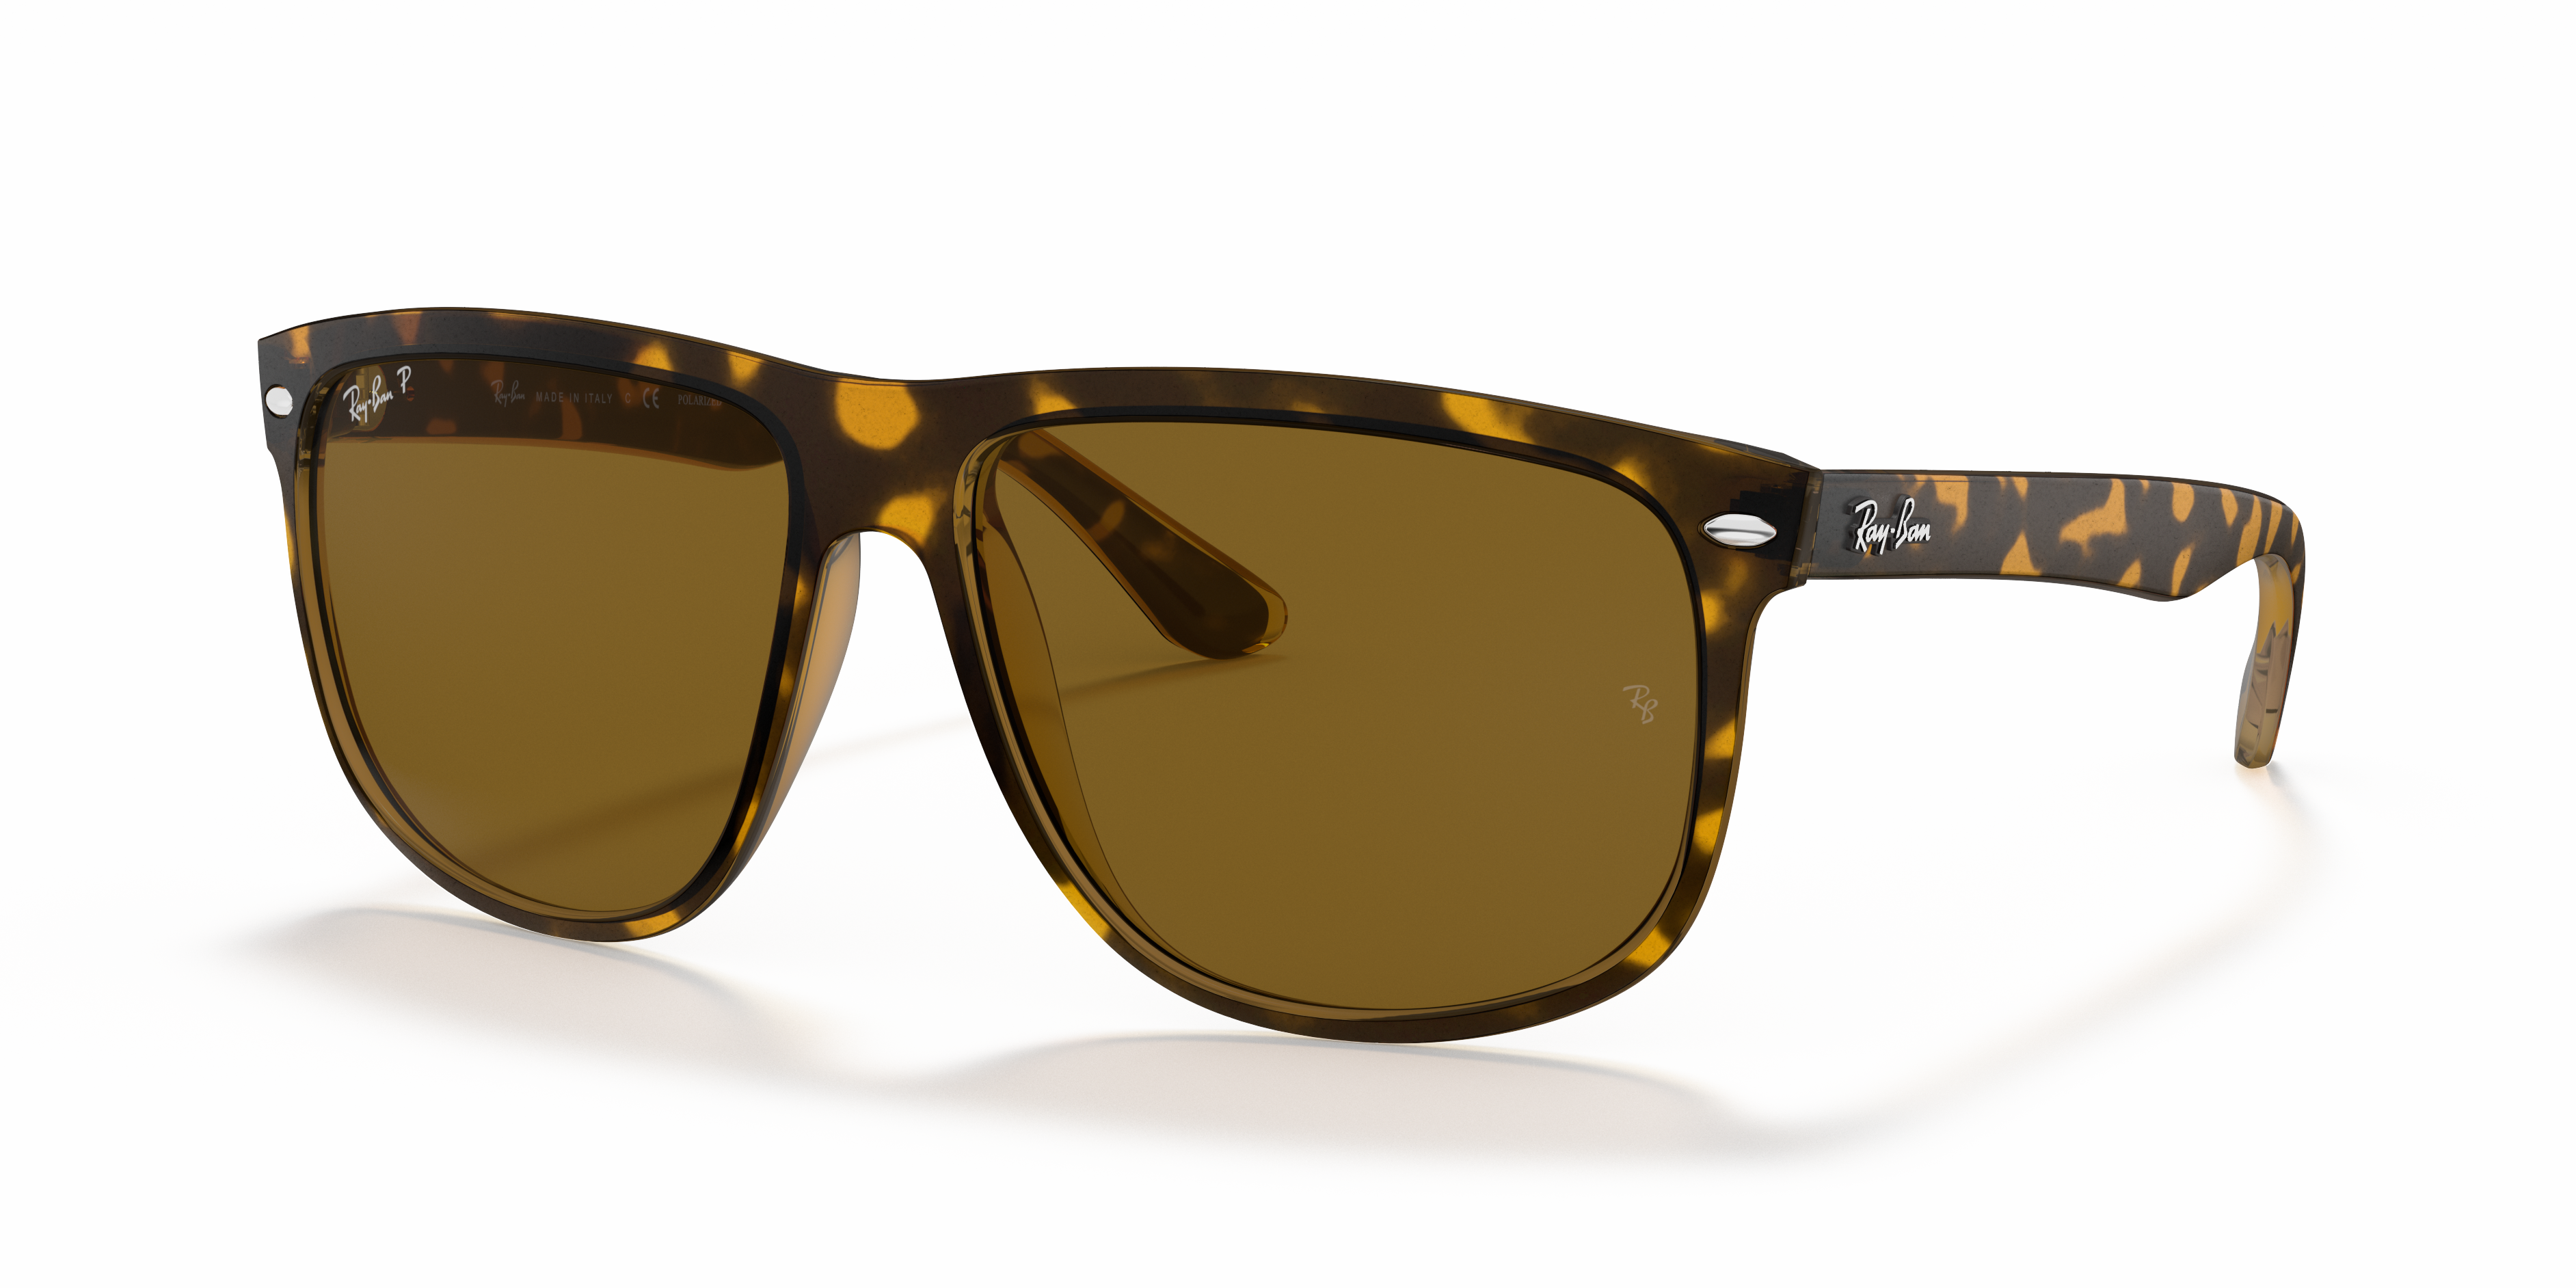 Rb4147 Sunglasses in Tortoise and Brown | Ray-Ban®